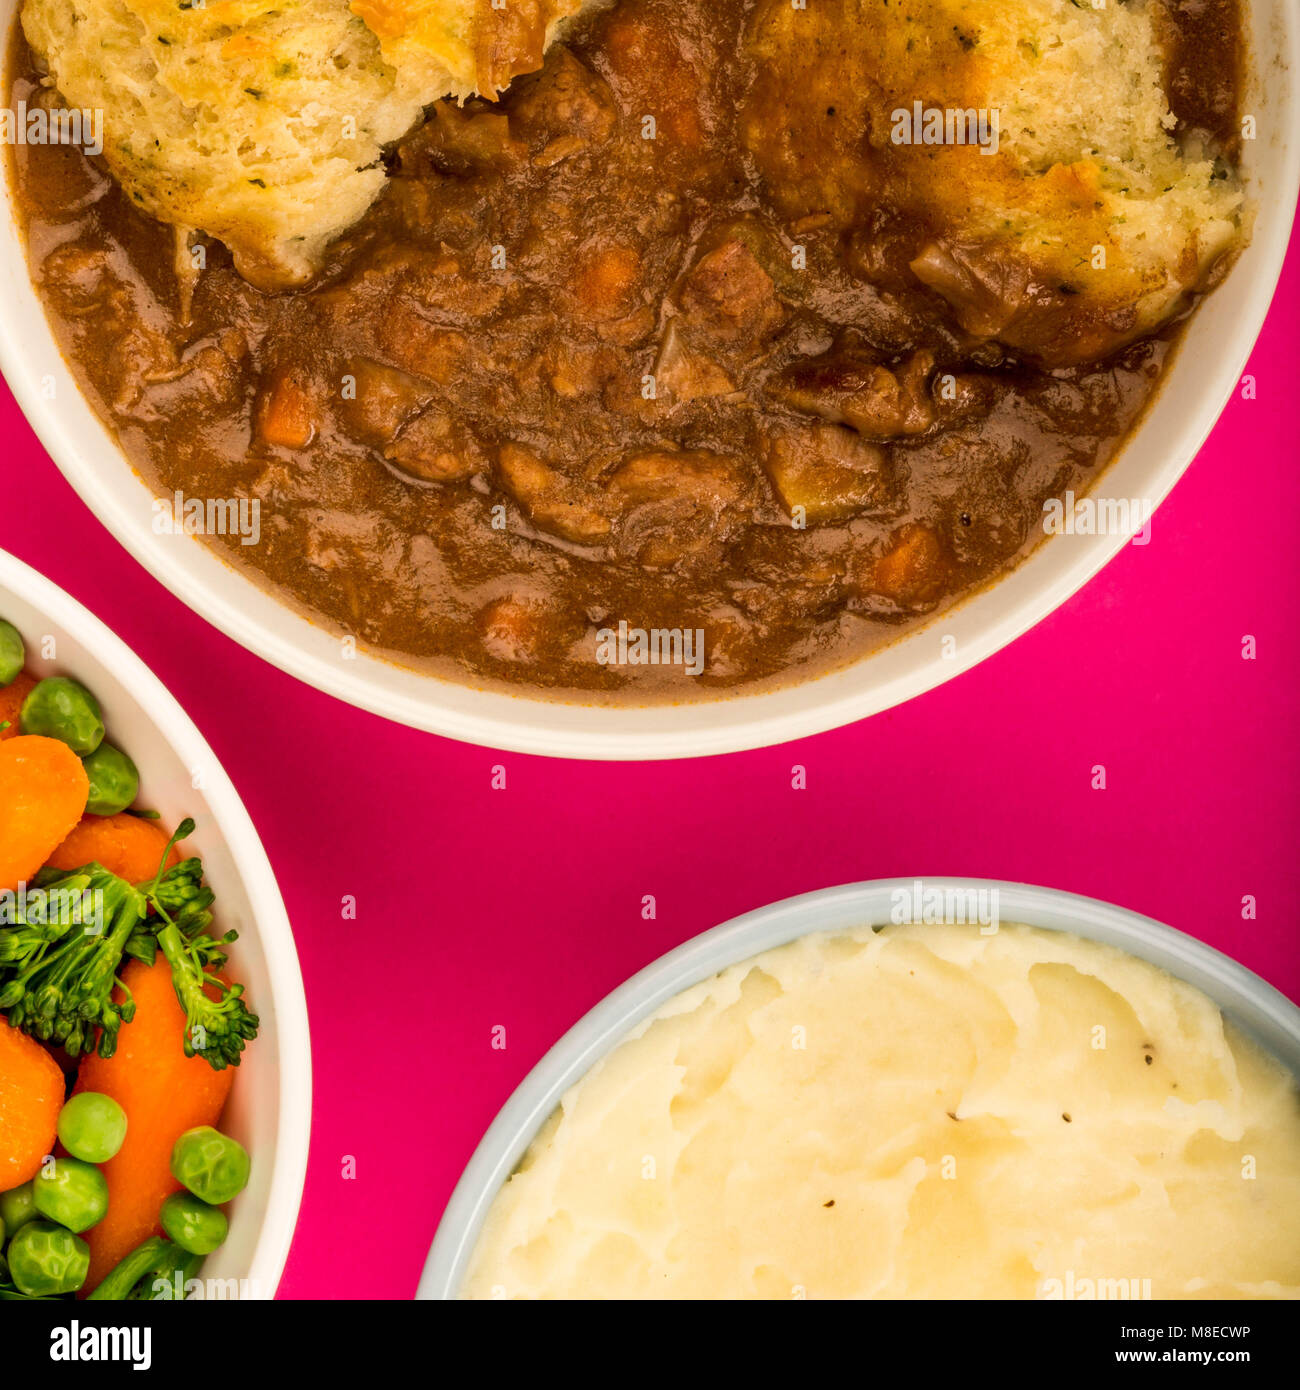 Traditional British Beef Casserole With Dumplings Against A Pink Background With A Bowl Of Mixed Vegetables And Mashed Potatoes Stock Photo